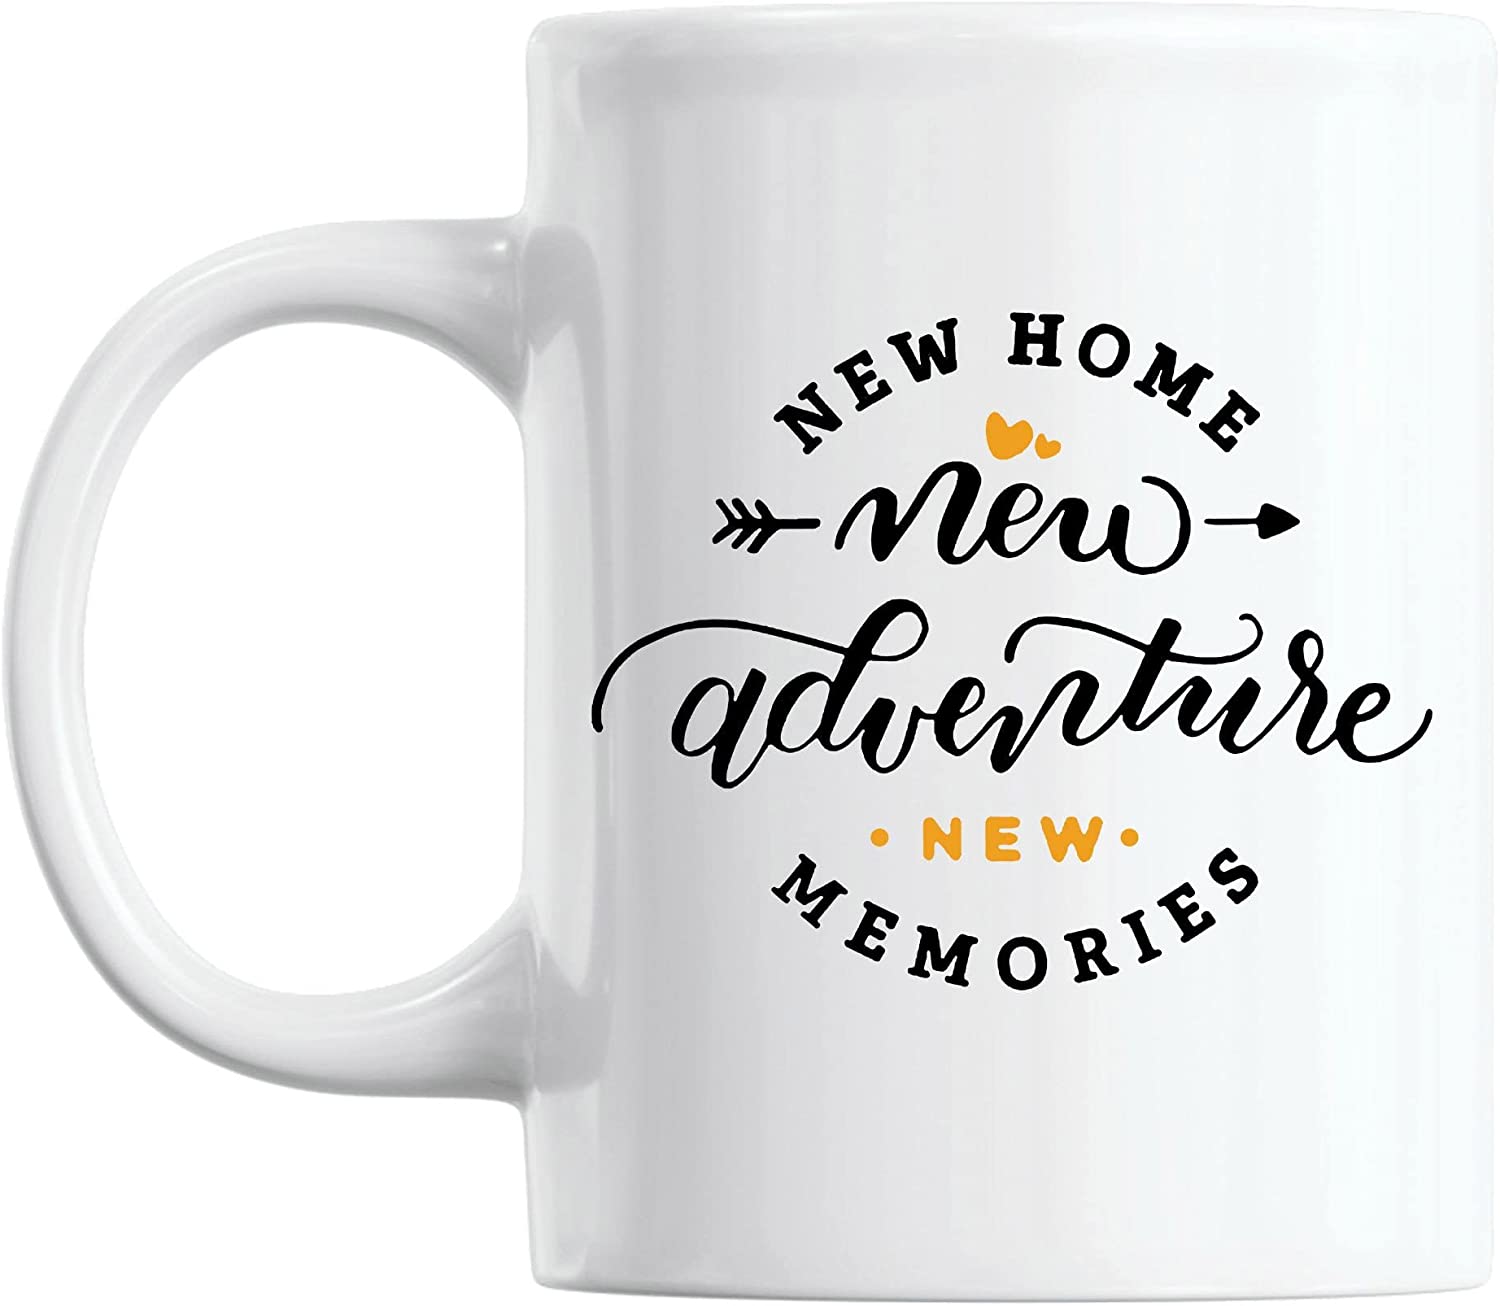 New Home New Adventures New Memories Mug Housewarming Gifts New Home, New  House Mug, House Owner Gift Basket House Warming Presents for New Home, House  Warming Gifts for Women Couple Friend 